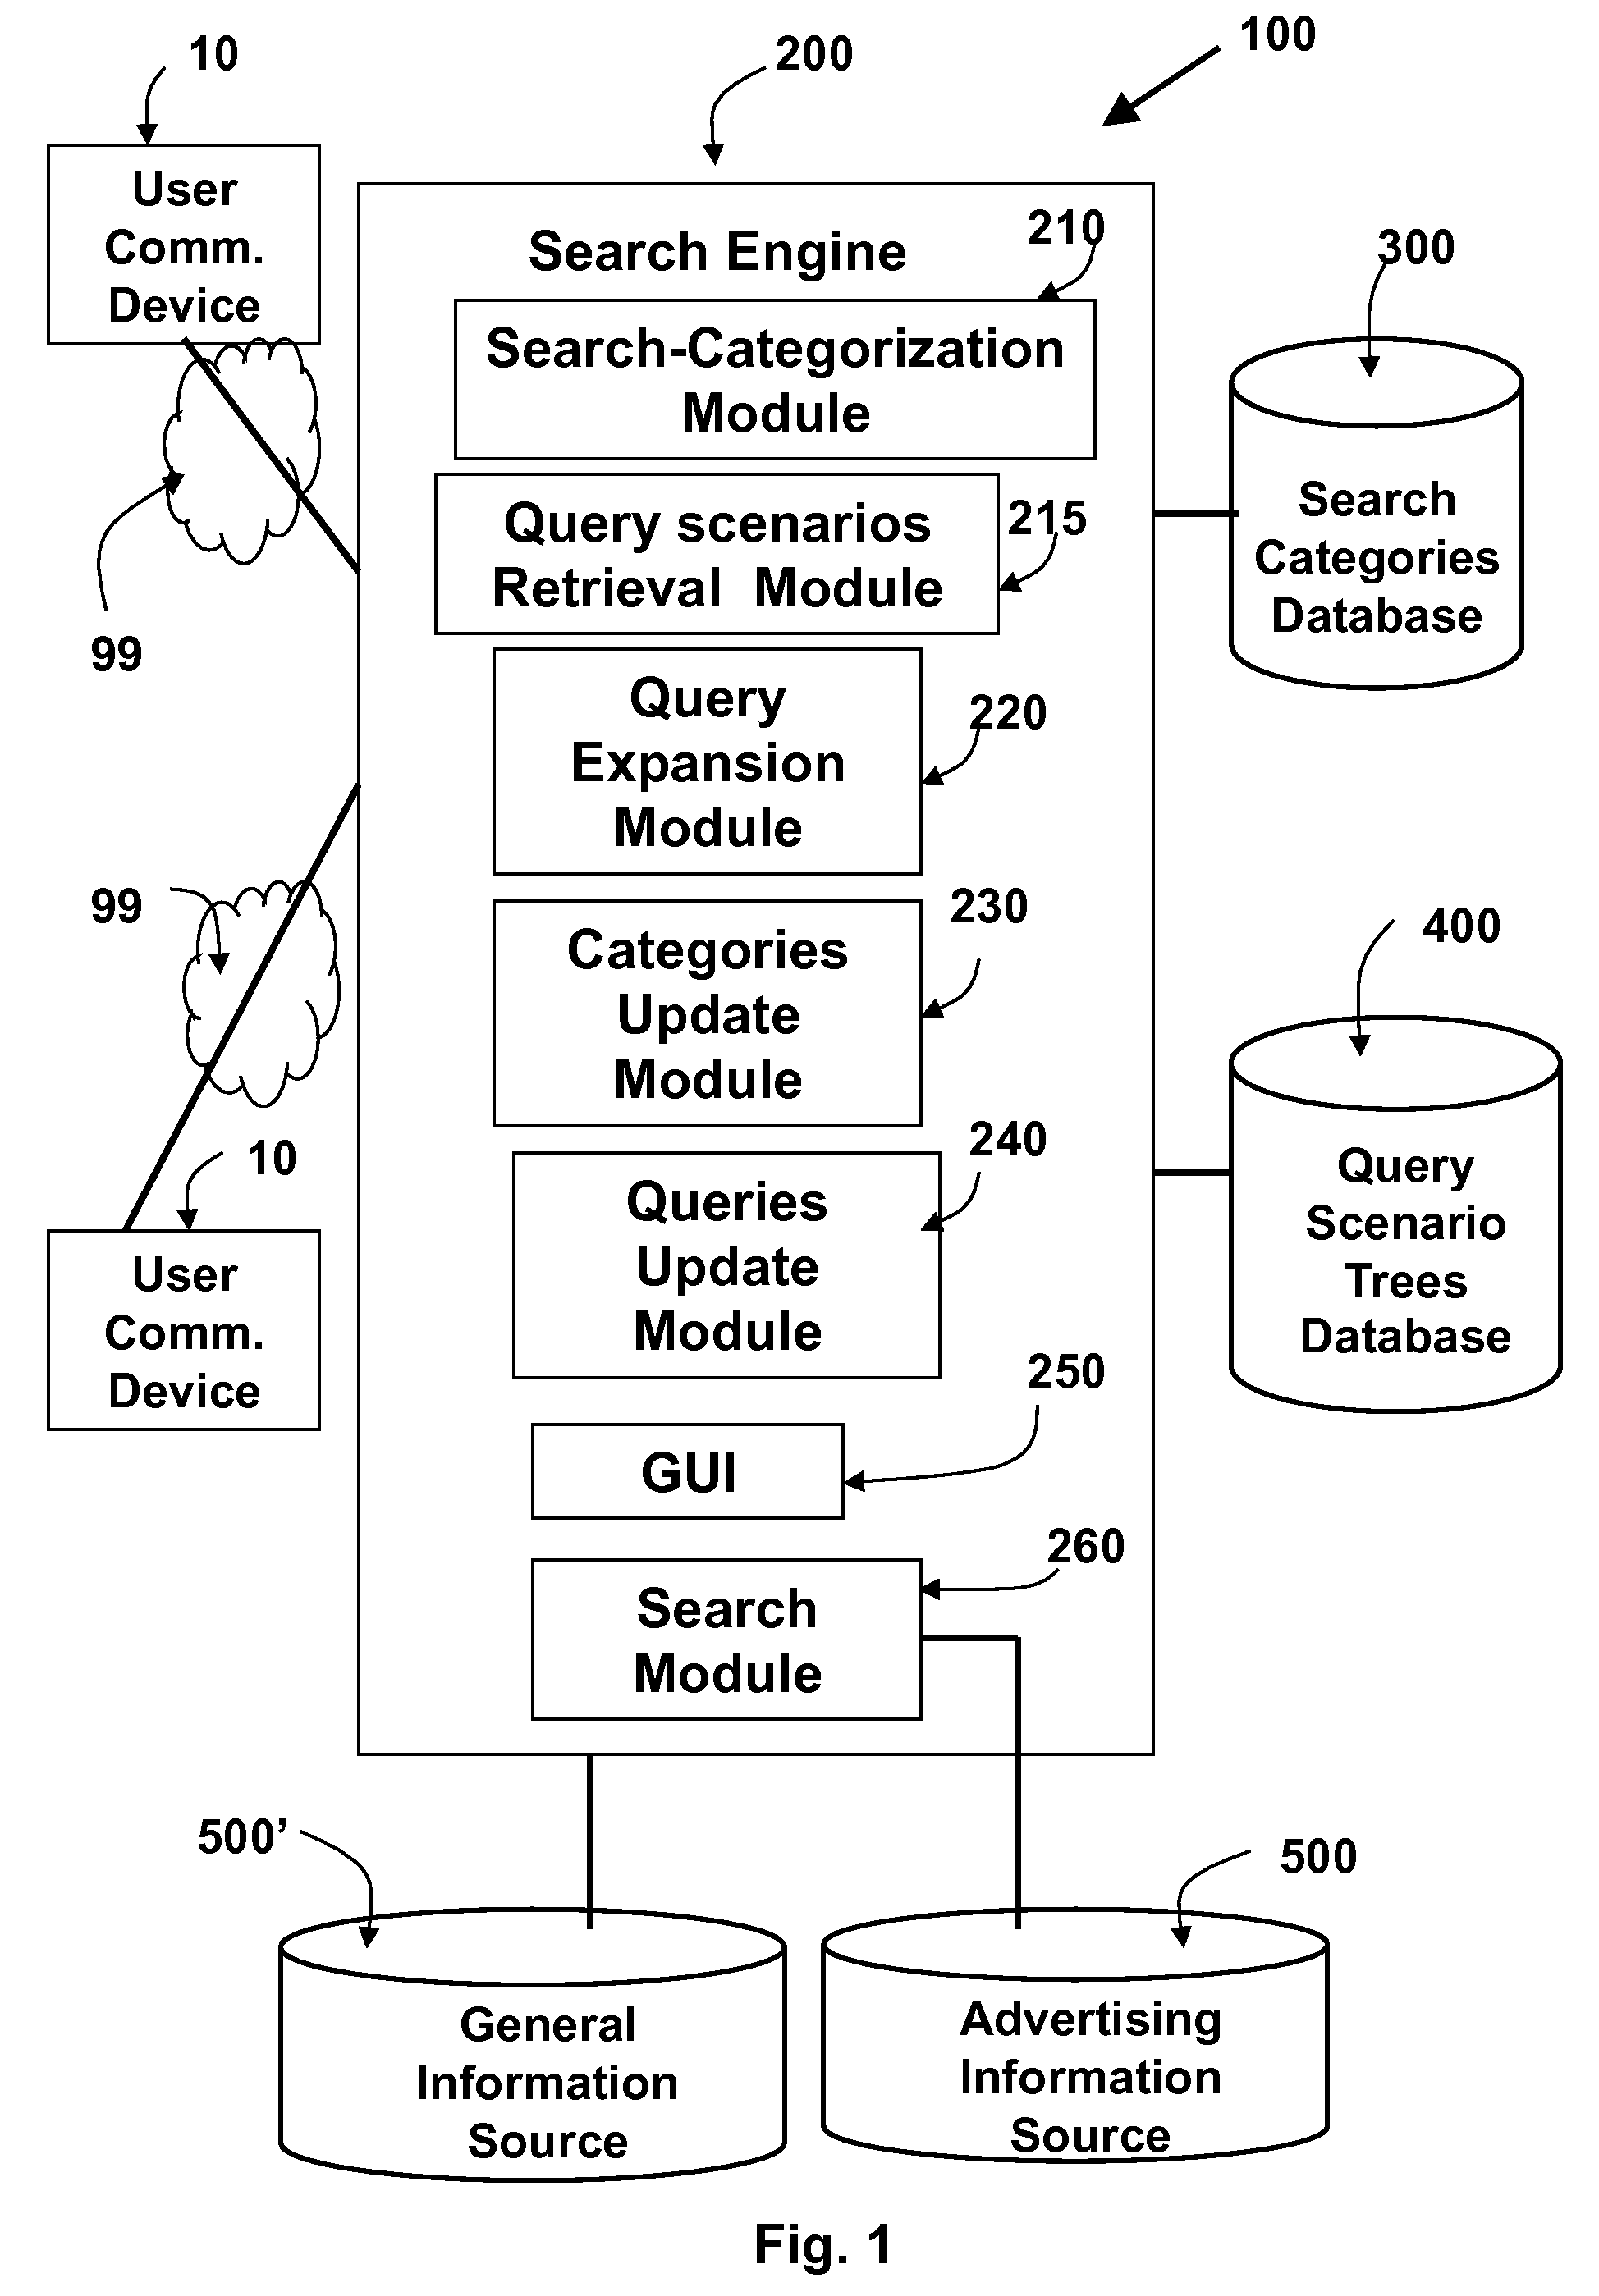 Expansion of Search Queries Using Information Categorization